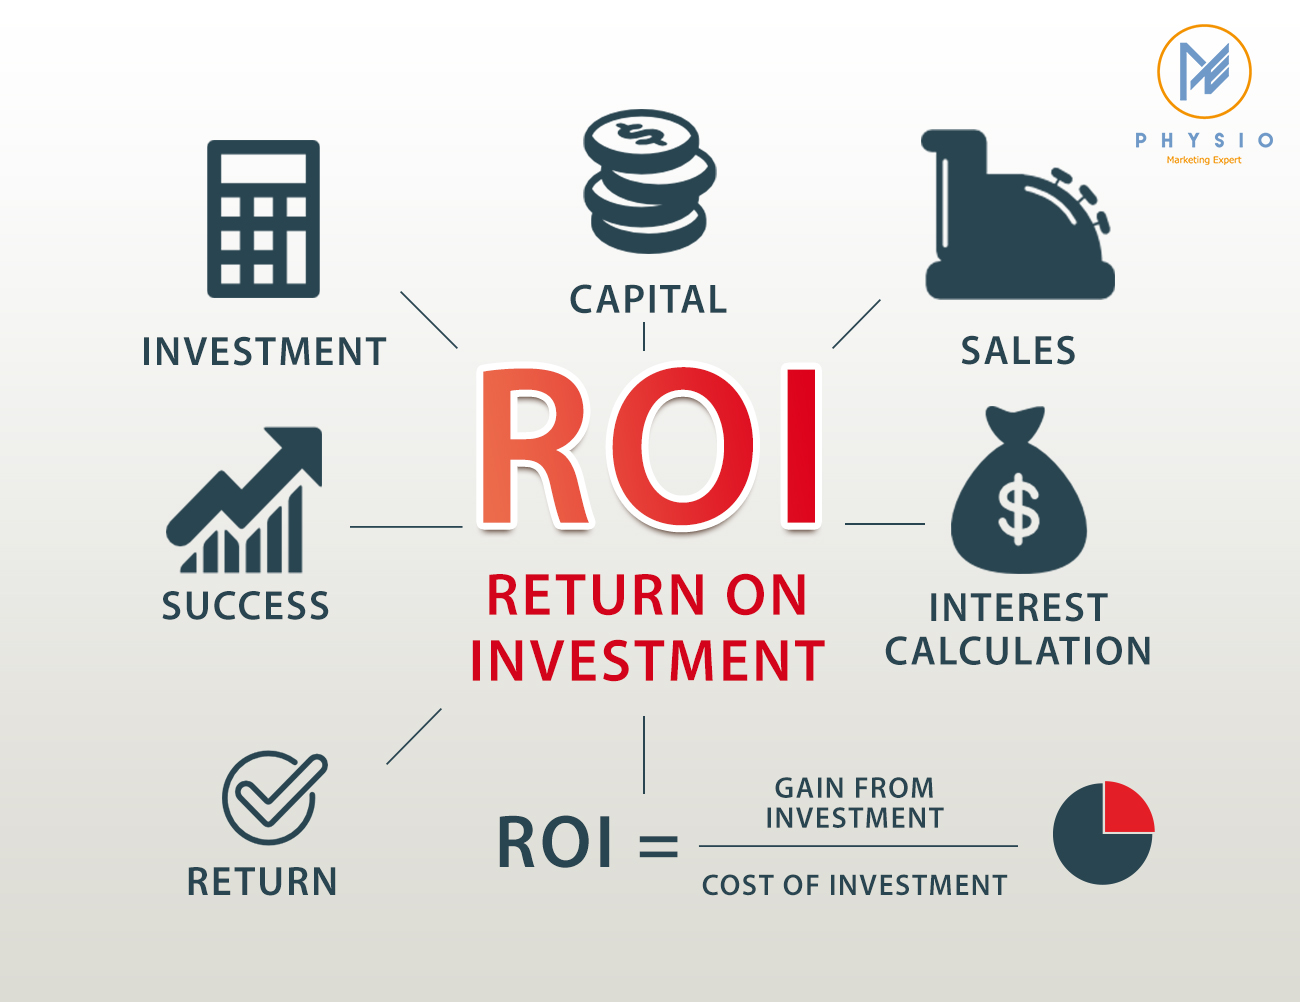 Four Ways To Double The ROI From Your Marketing - Physio Marketing Expert